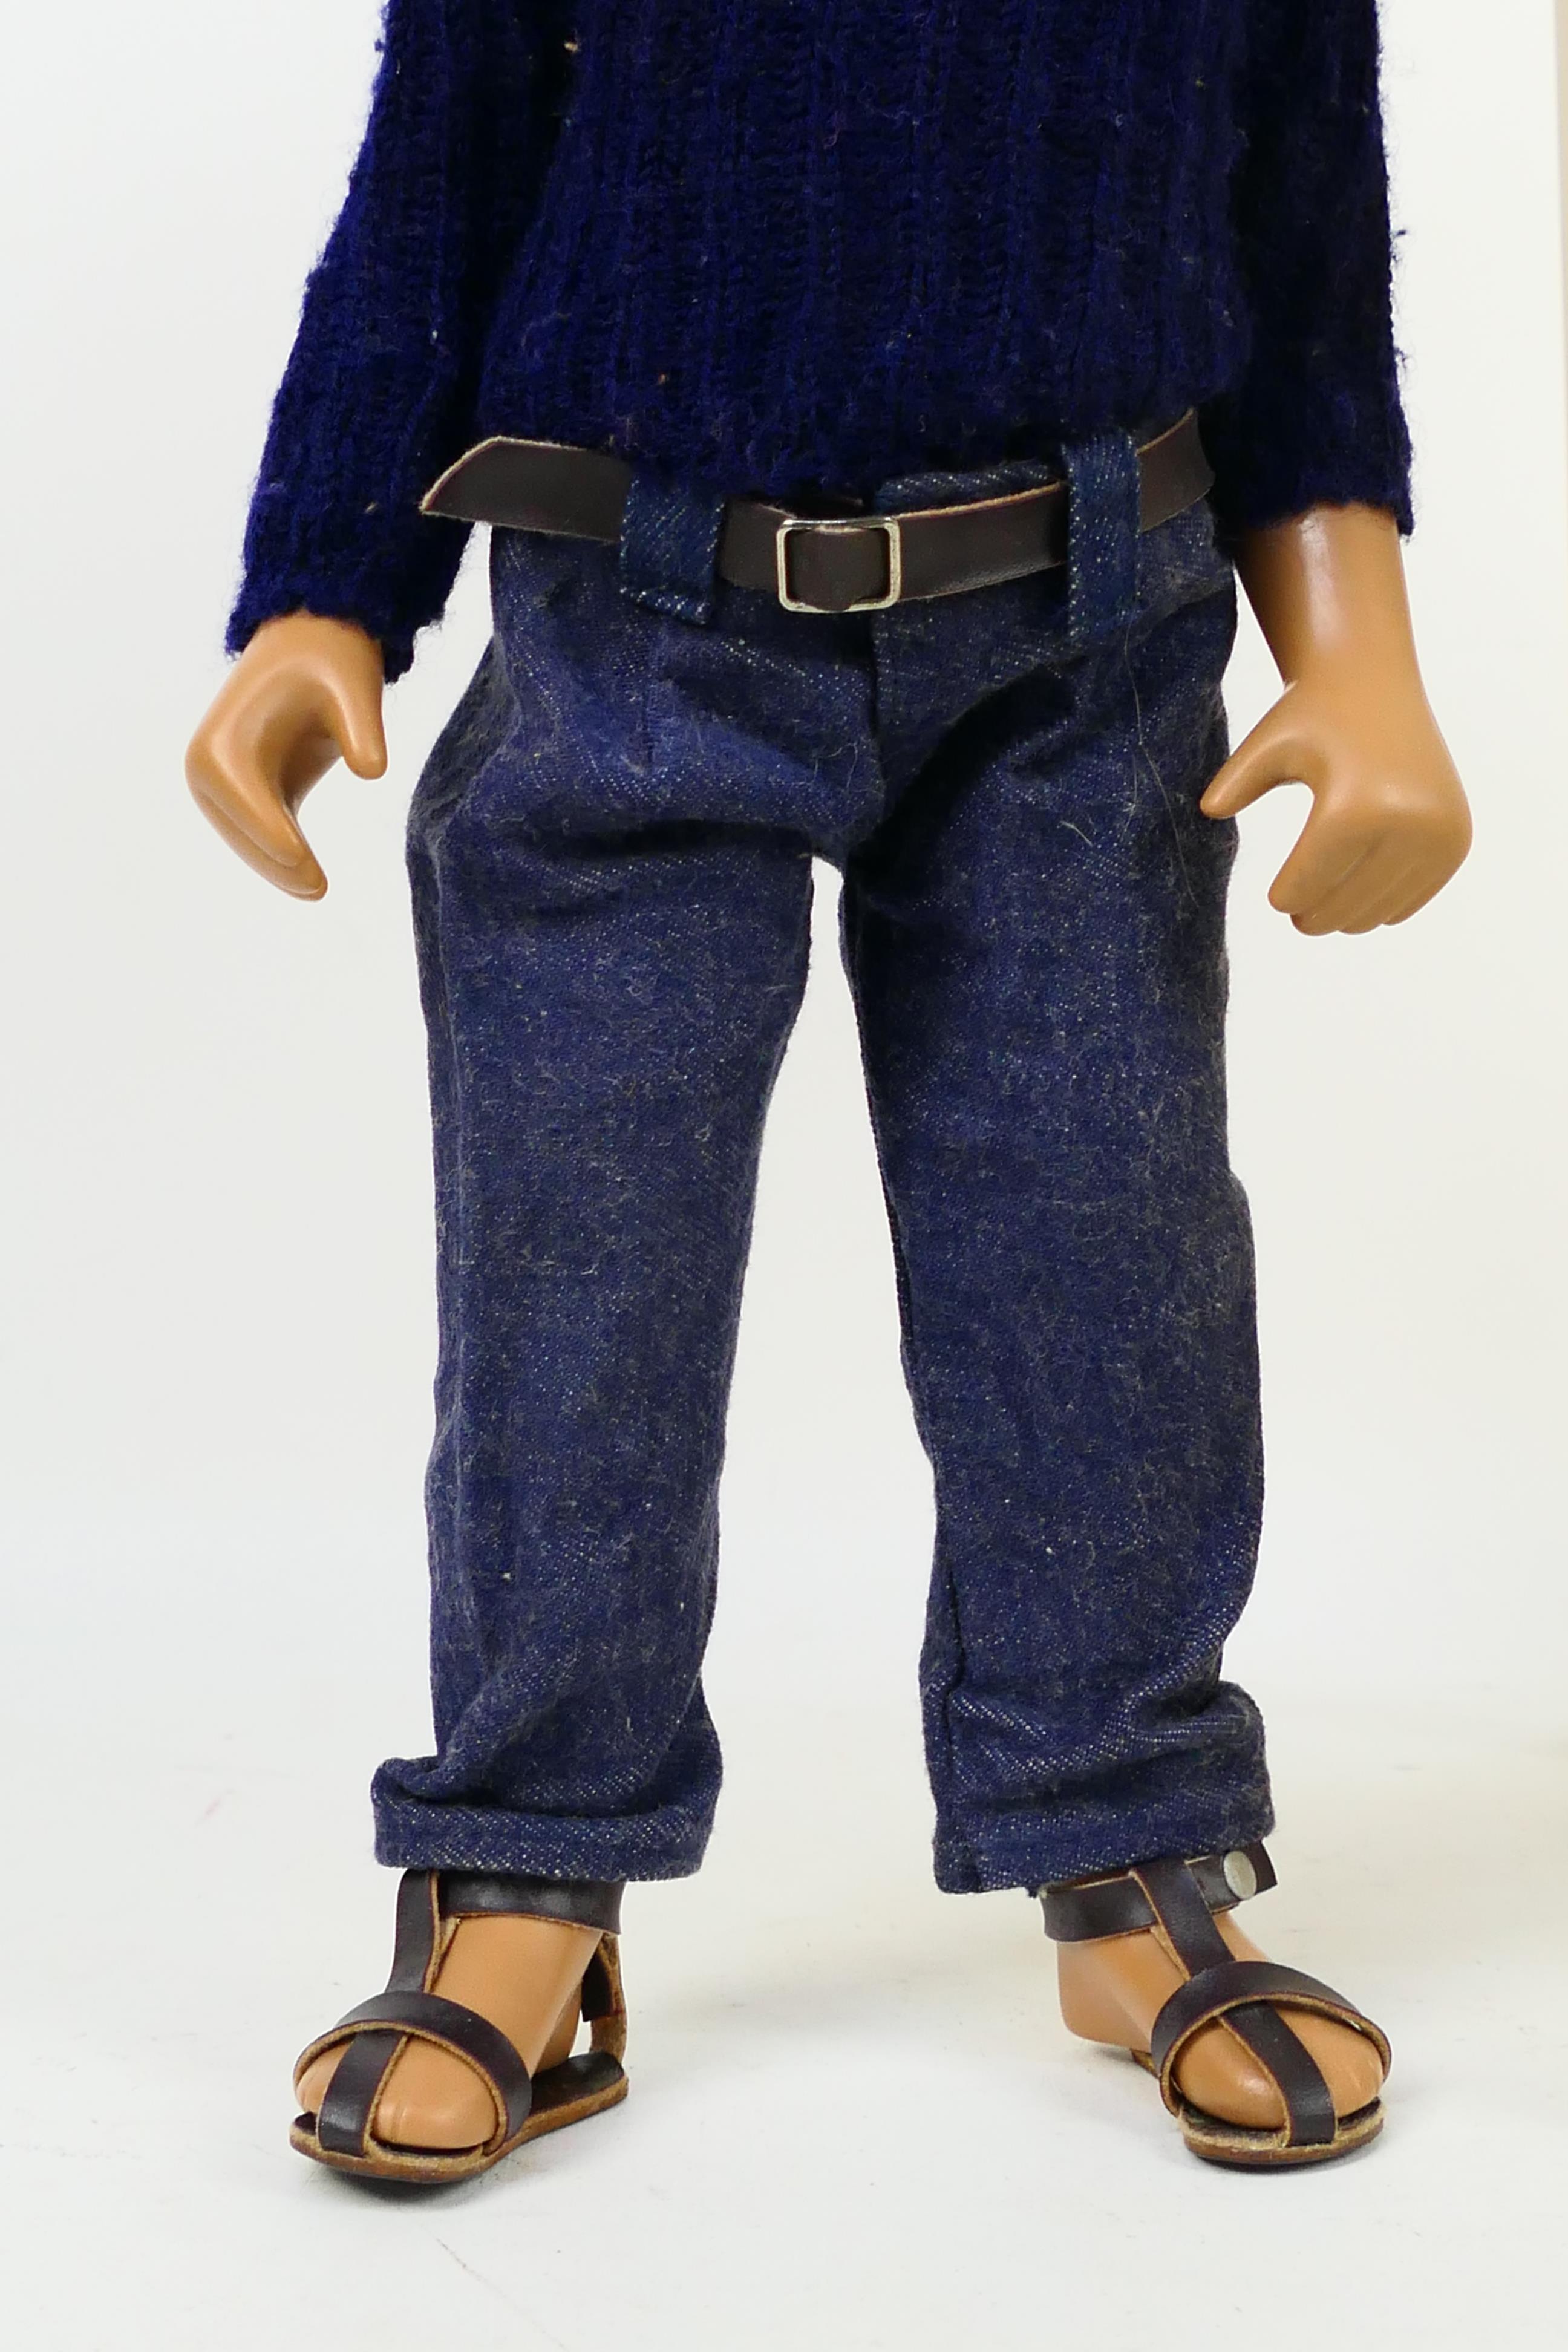 Trendon - Sasha Doll - A boxed Gregor Doll with dark hair and denims # D342. - Image 4 of 5